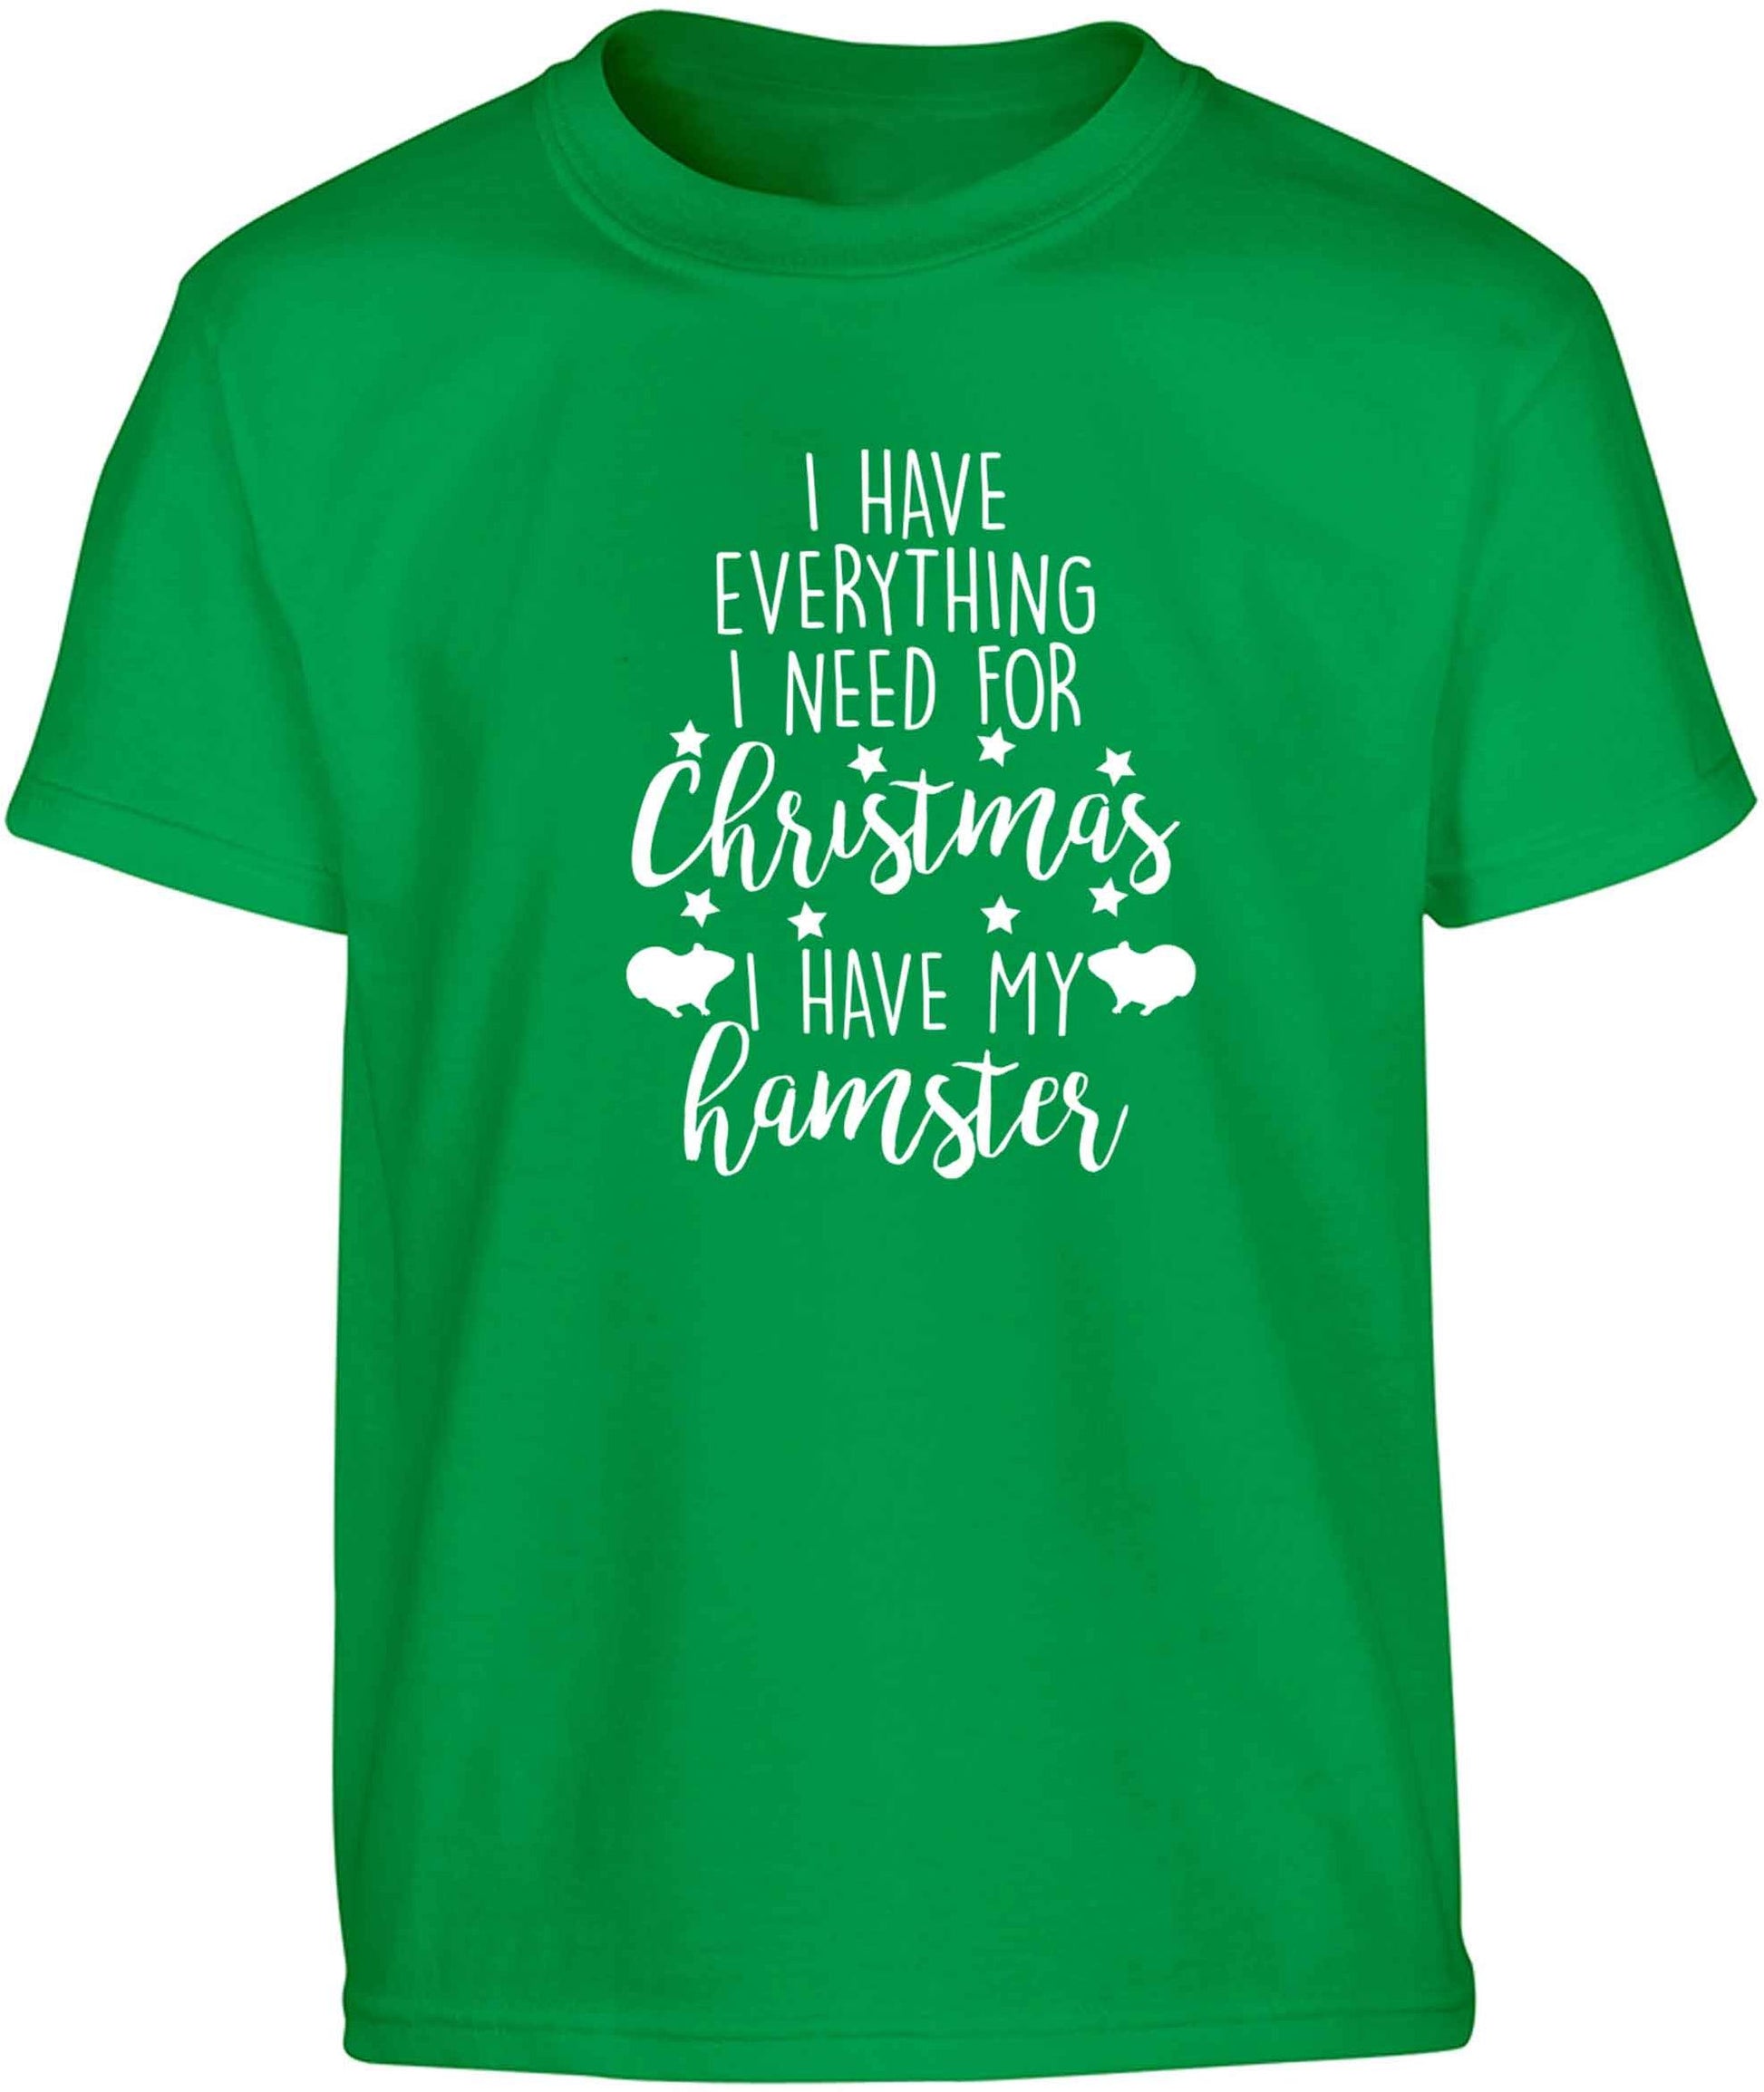 I have everything I need for Christmas I have my hamster Children's green Tshirt 12-13 Years